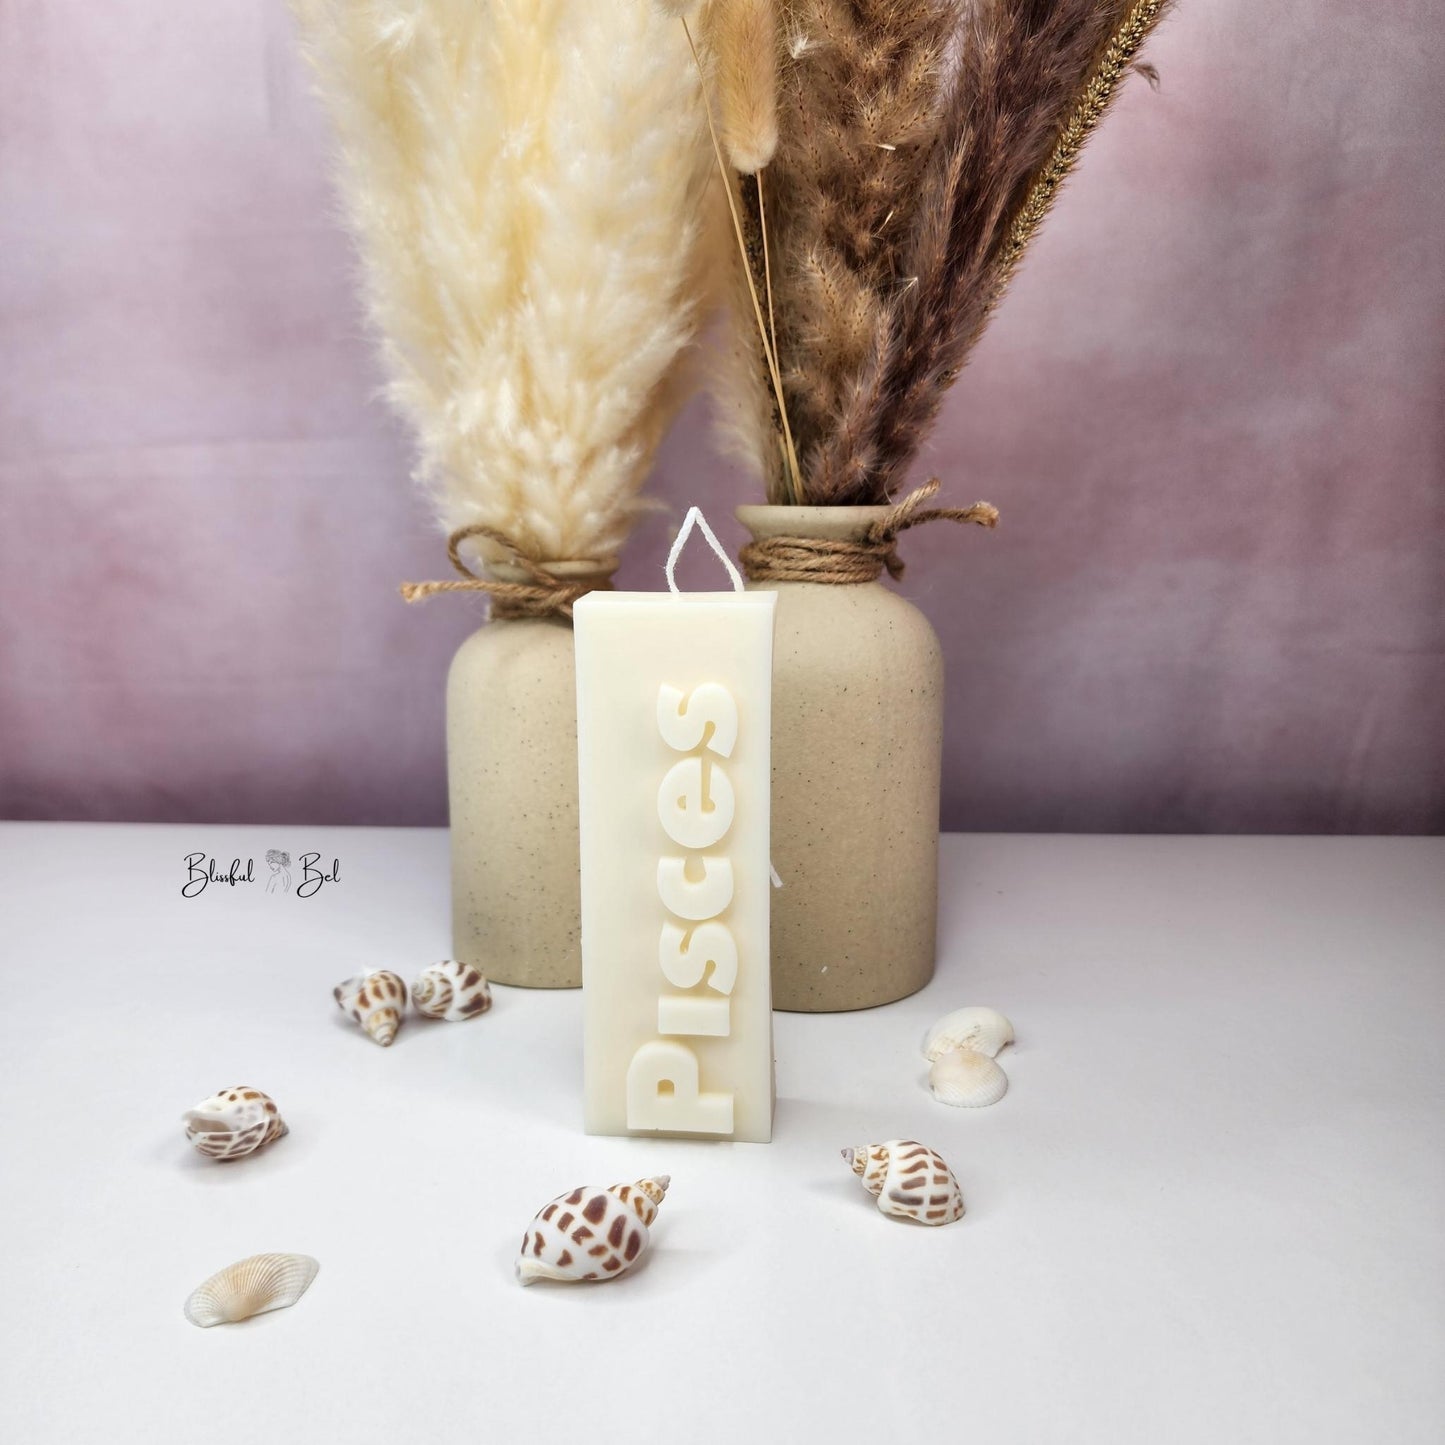 PISCES Zodiac Sign Astrology Candle